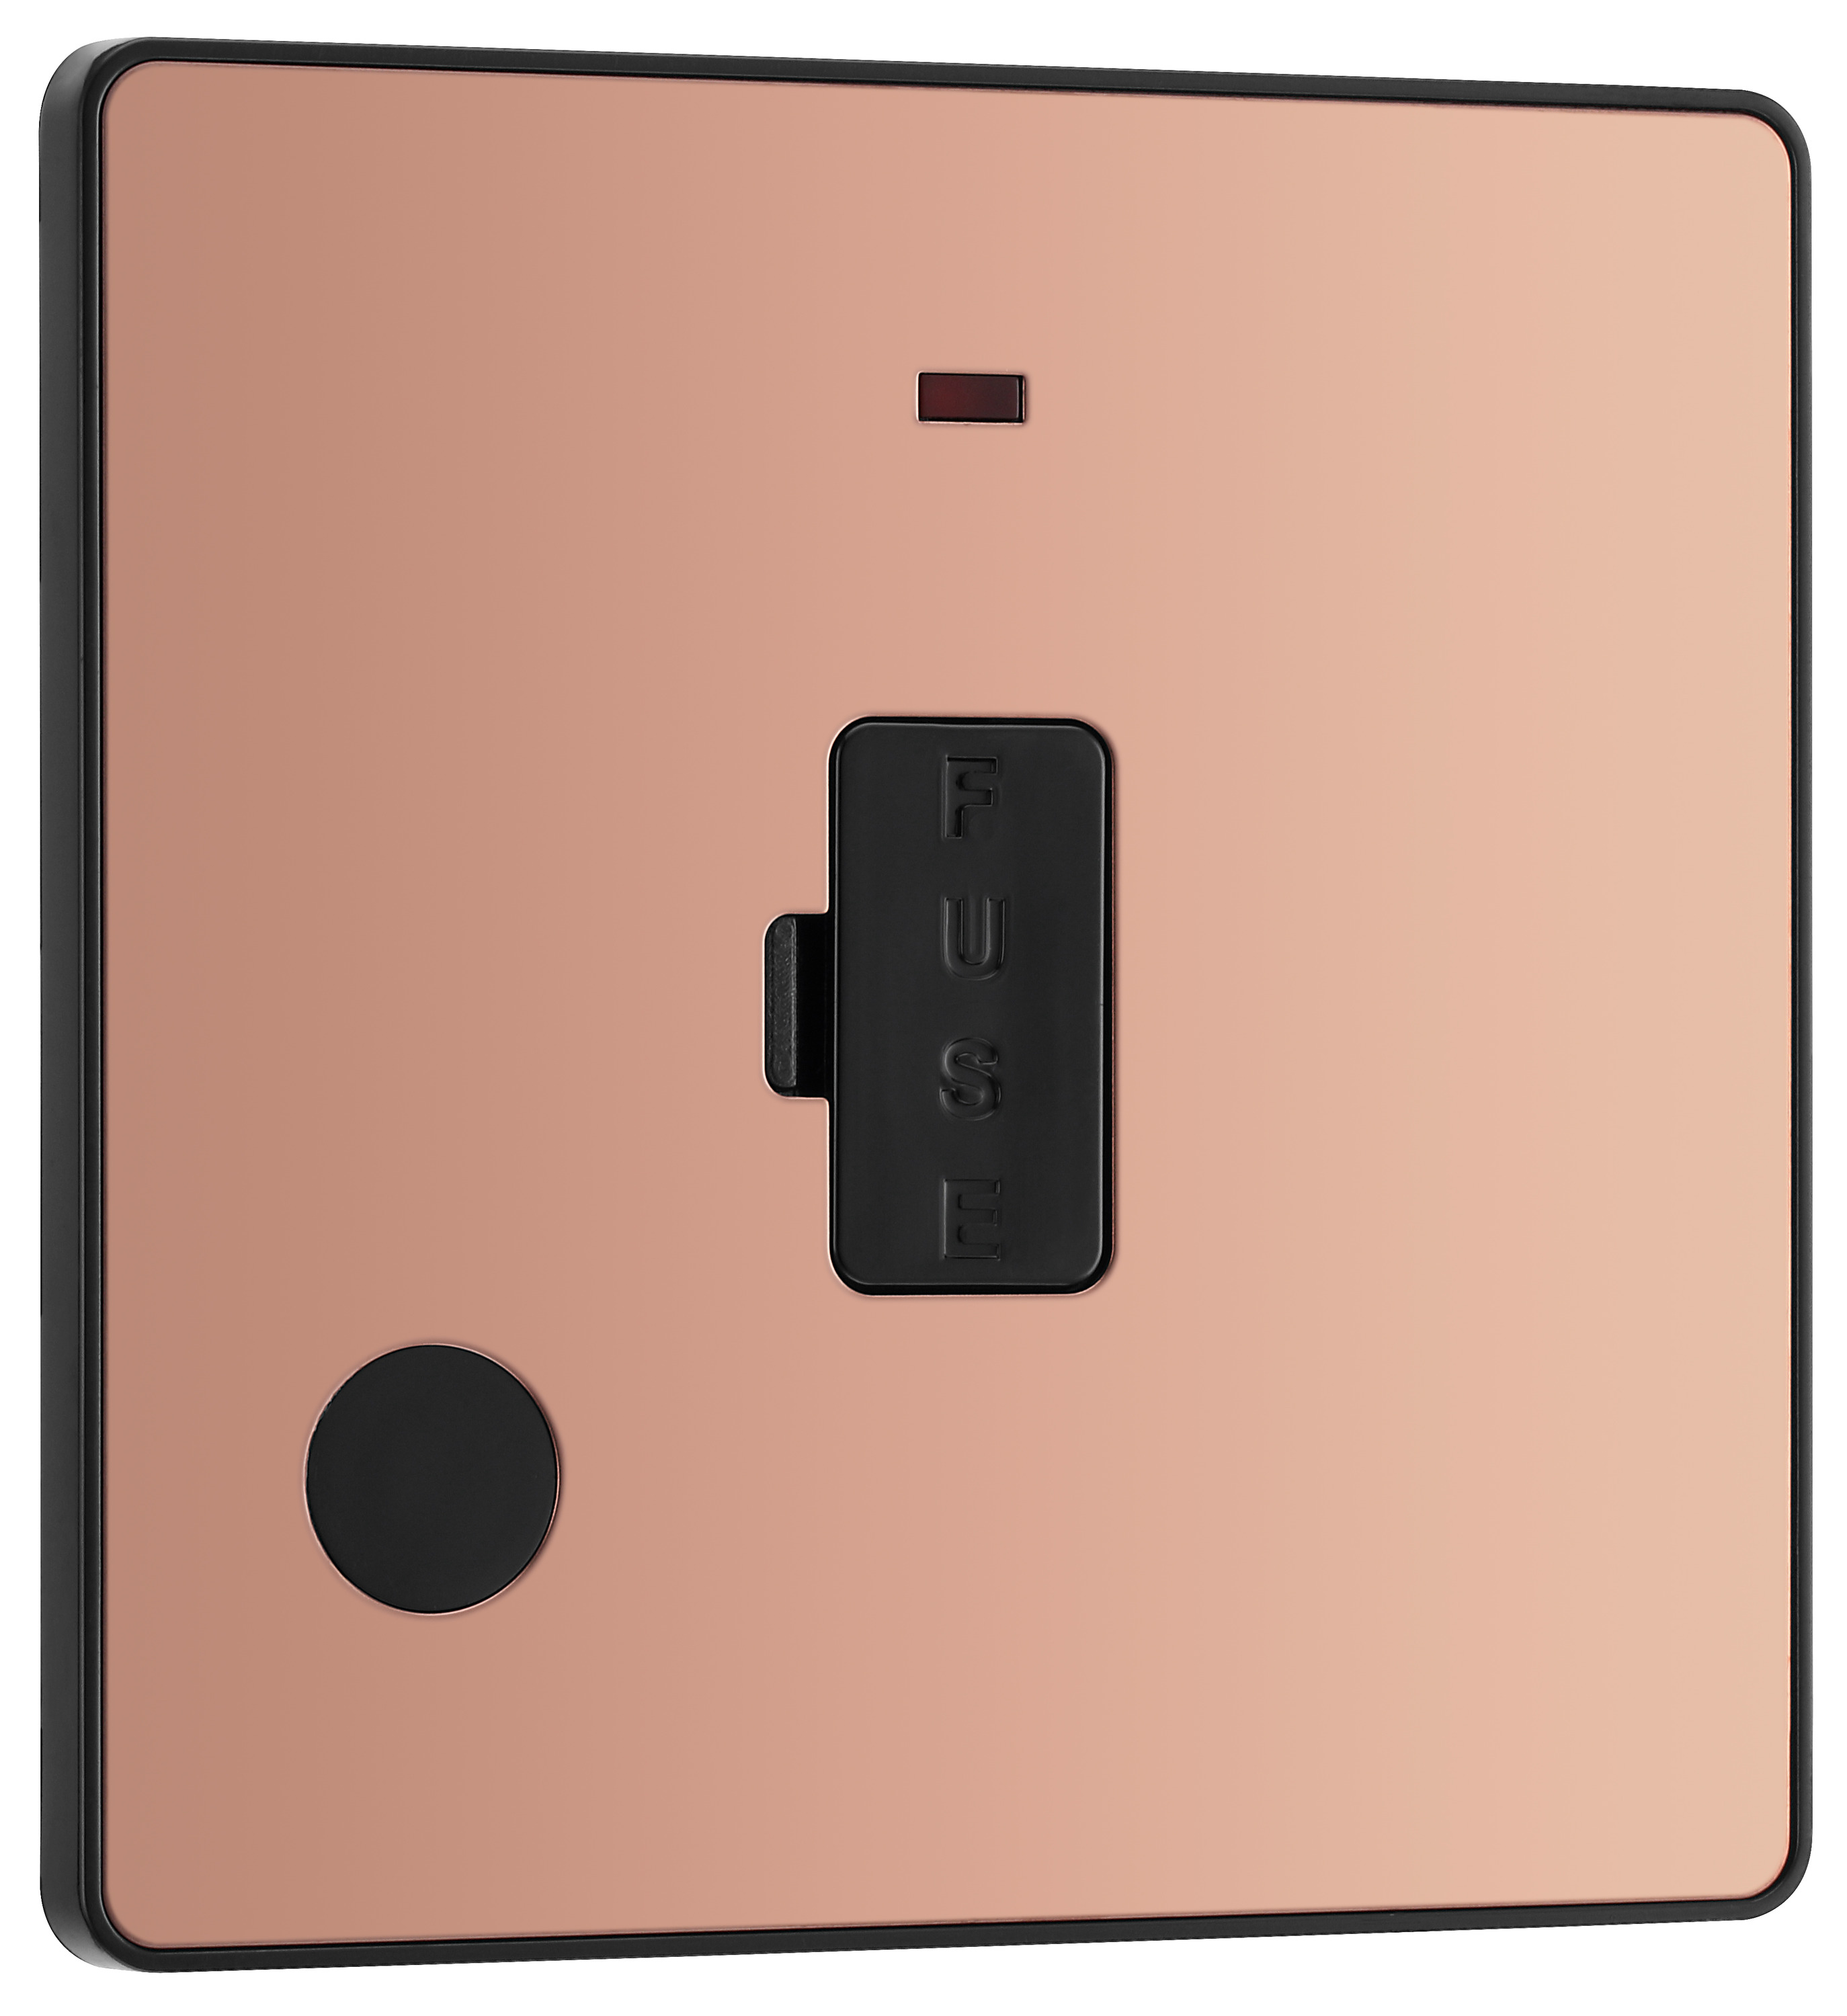 BG Evolve Polished Copper 13A Unswitched Fused Connection Unit with Power Led Indicator & Flex Outlet